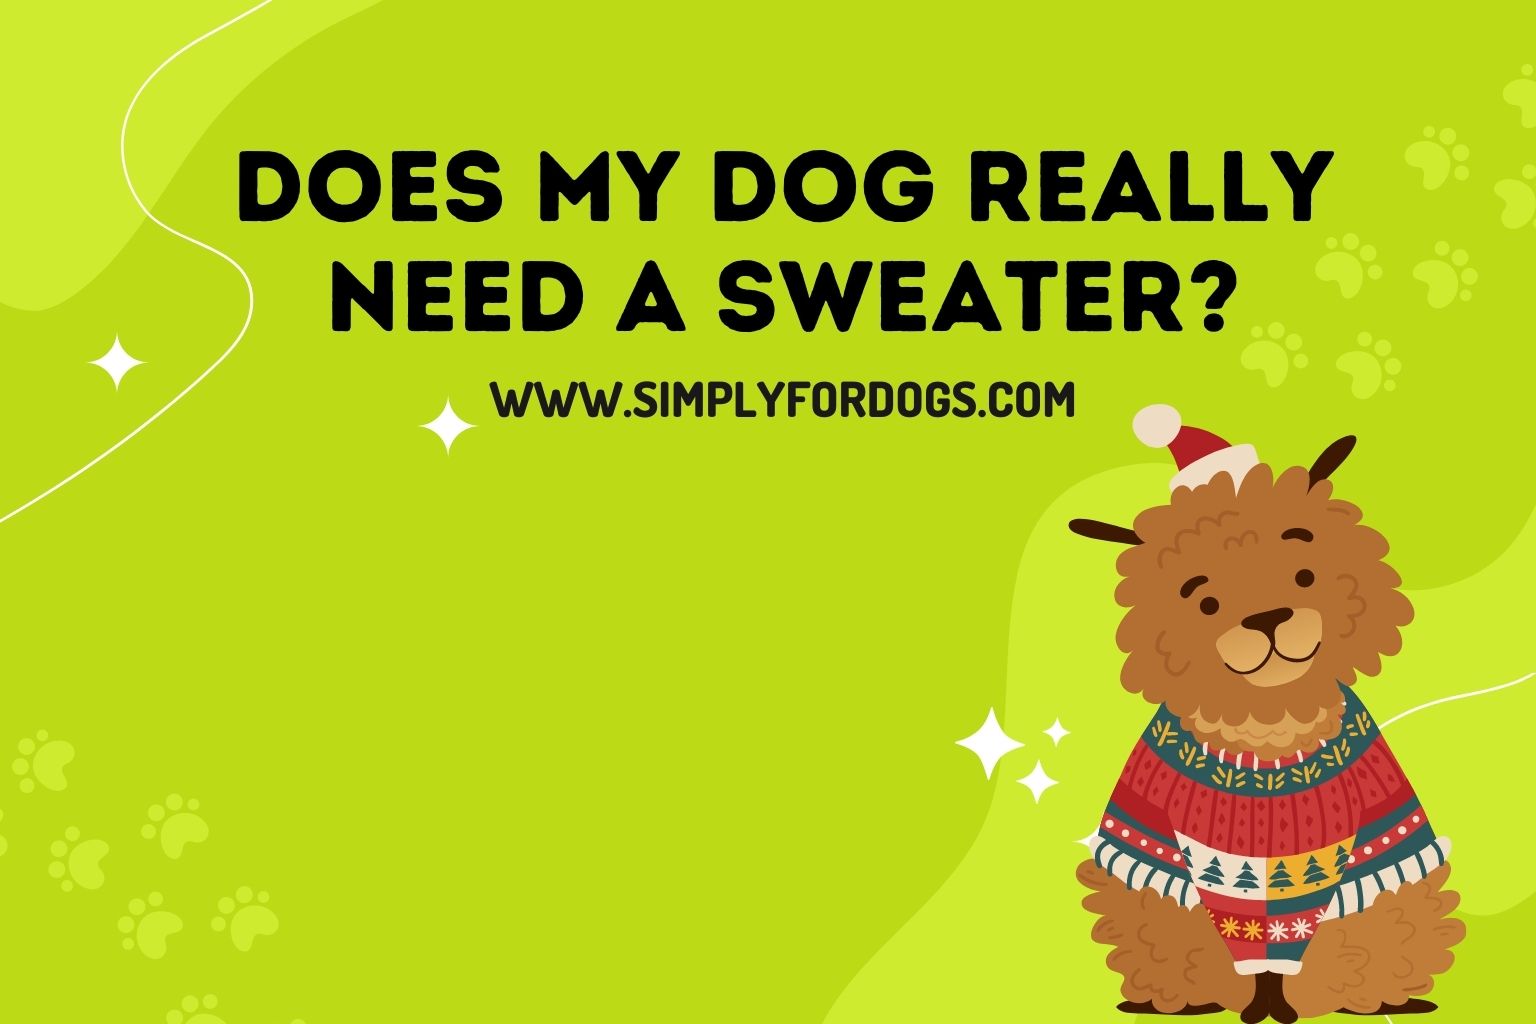 does-my-dog-really-need-a-sweater-dog-caring-tips-simply-for-dogs